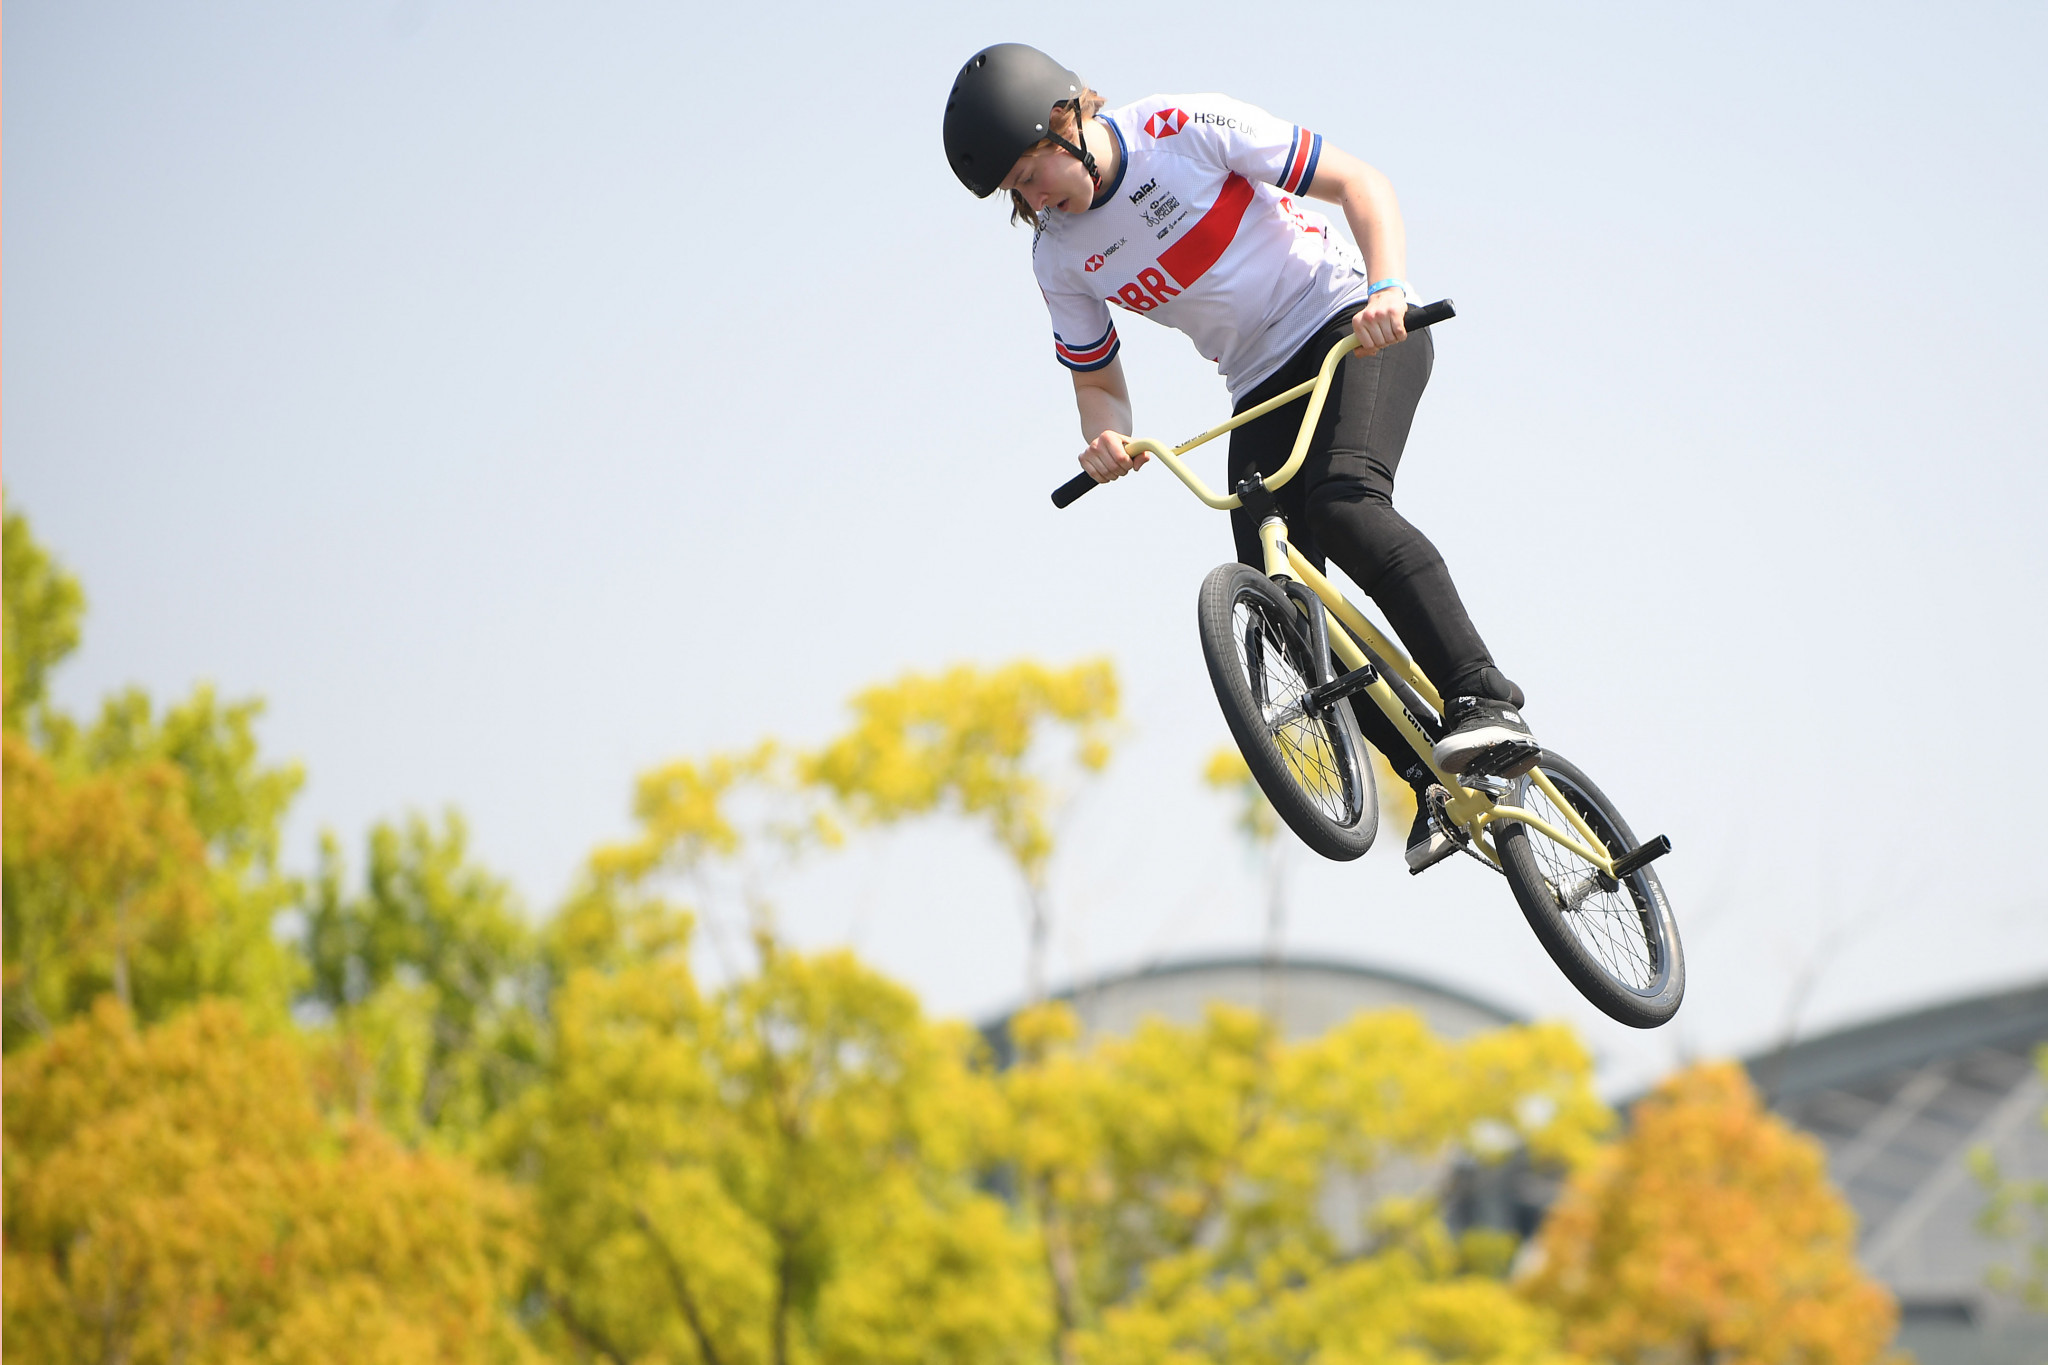 Britain's Charlotte Worthington won the women's BMX freestyle event at the FISE European Series in Madrid ©Getty Images